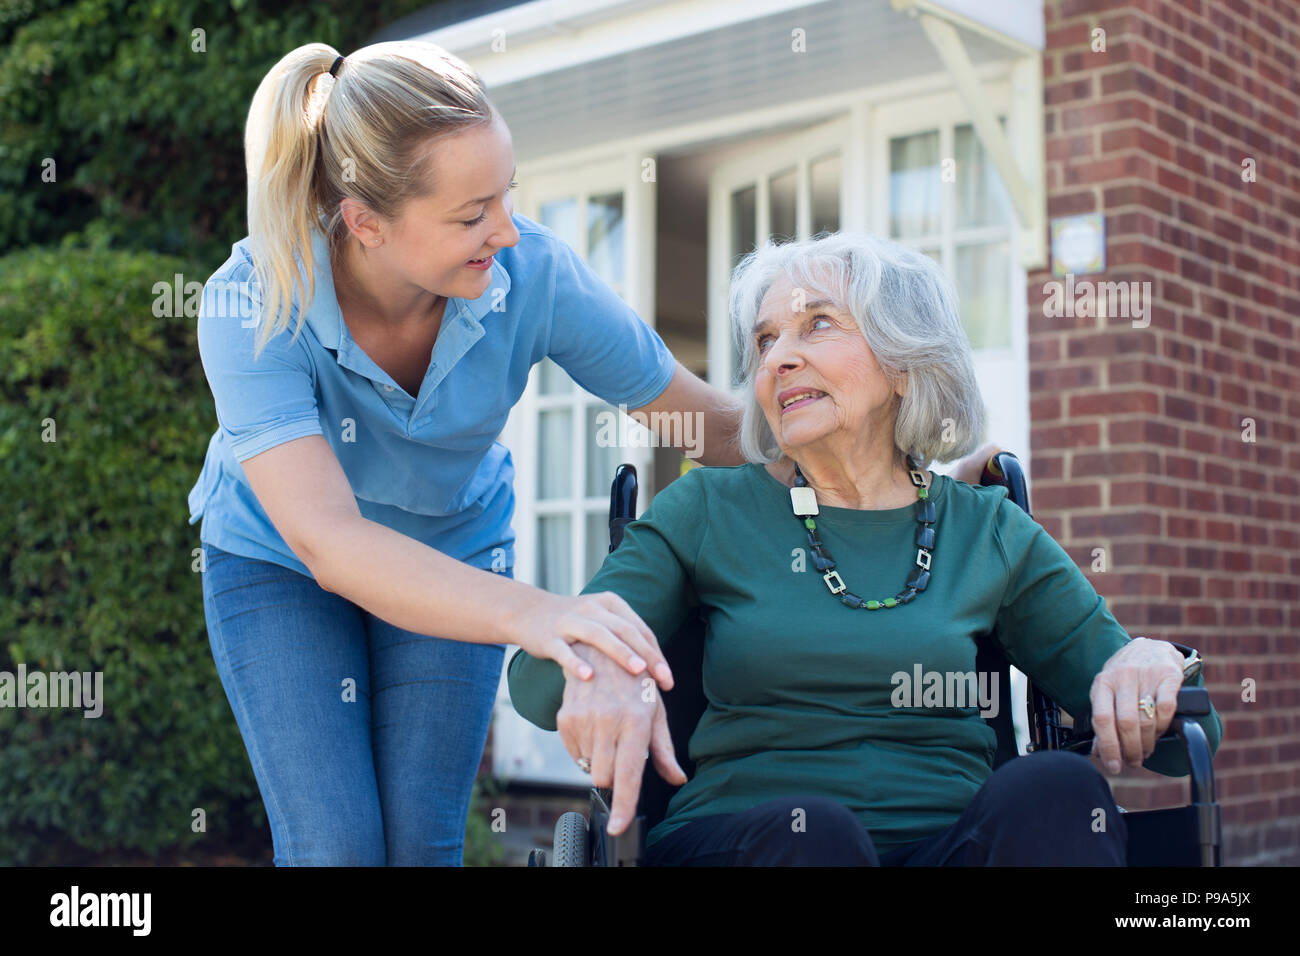 Carer Pushing Senior Woman In Wheelchair Outside Home Stock Photo